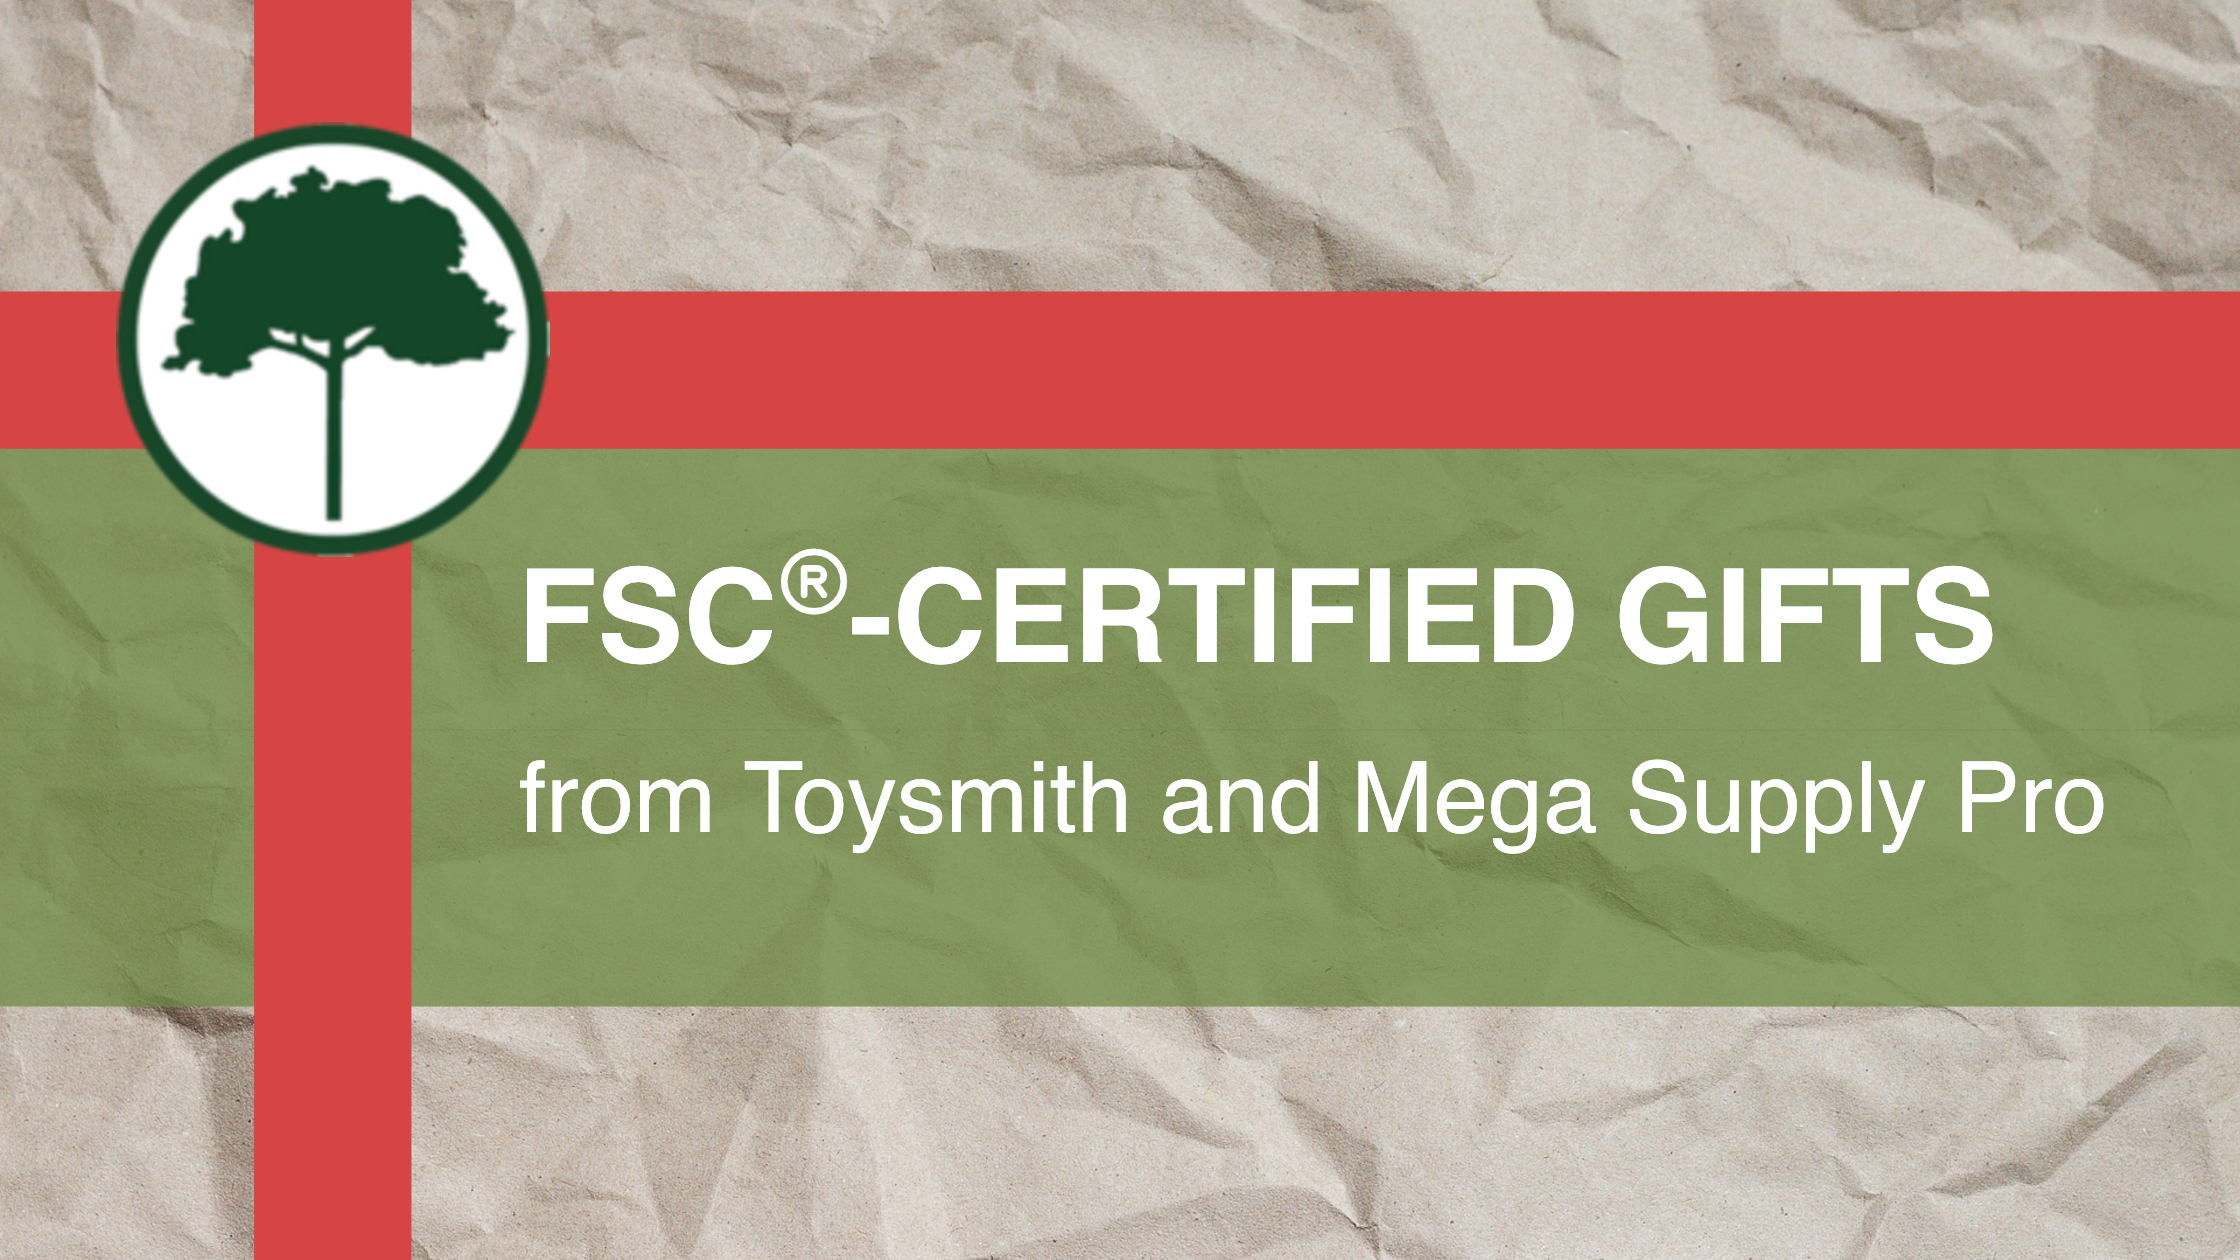 Gift wrapped in brown paper and a red ribbon. The ribbon is fixed in place with the AGC logo. Text reads: FSC Certified Gifts from Toysmith and Mega Supply Pro.